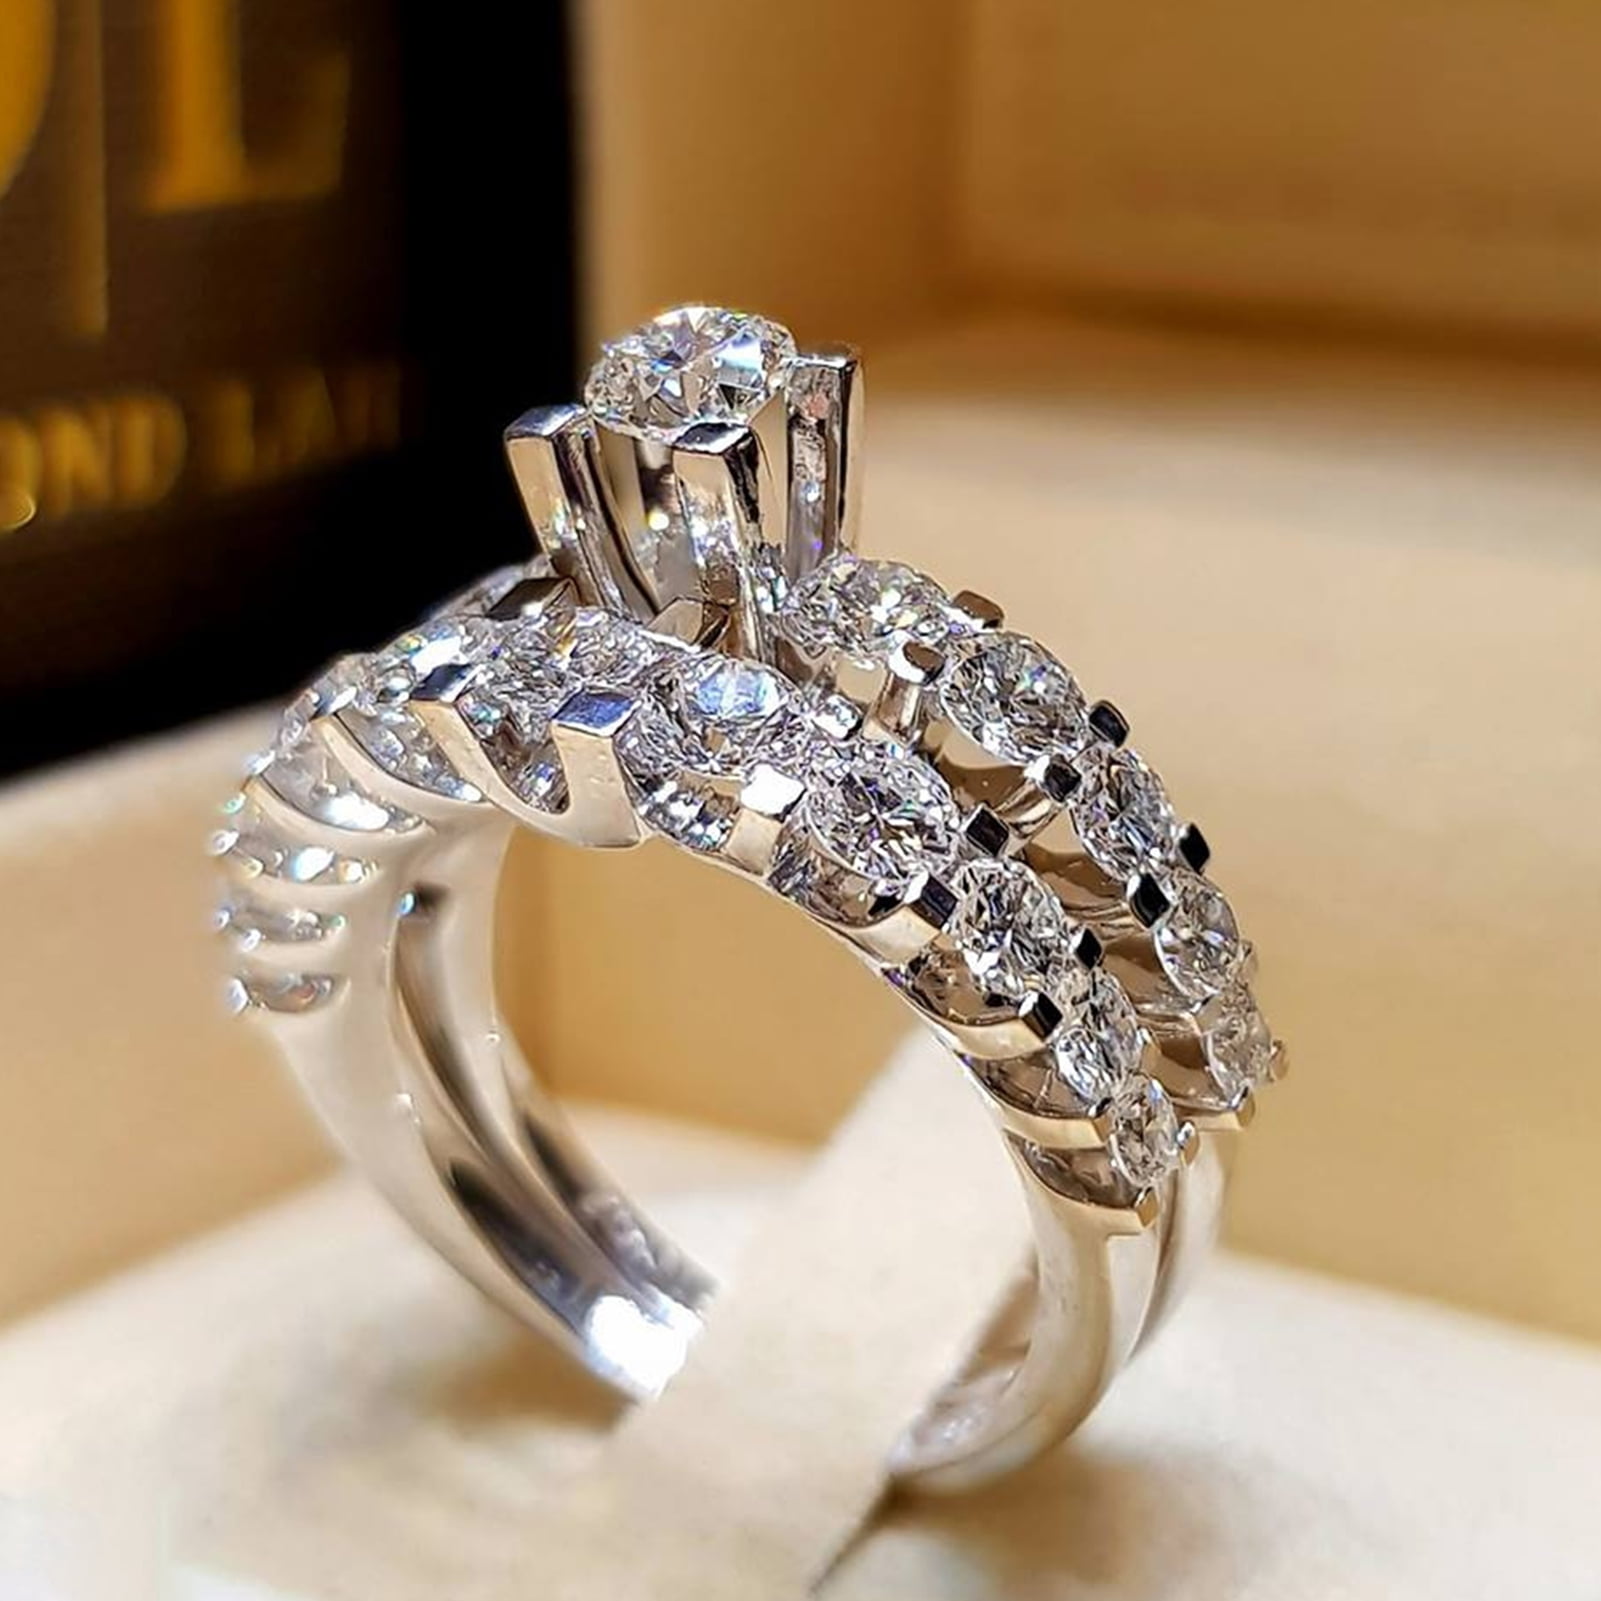 A Symbol of Love: The Heart Shaped Diamond Ring – Mark Broumand